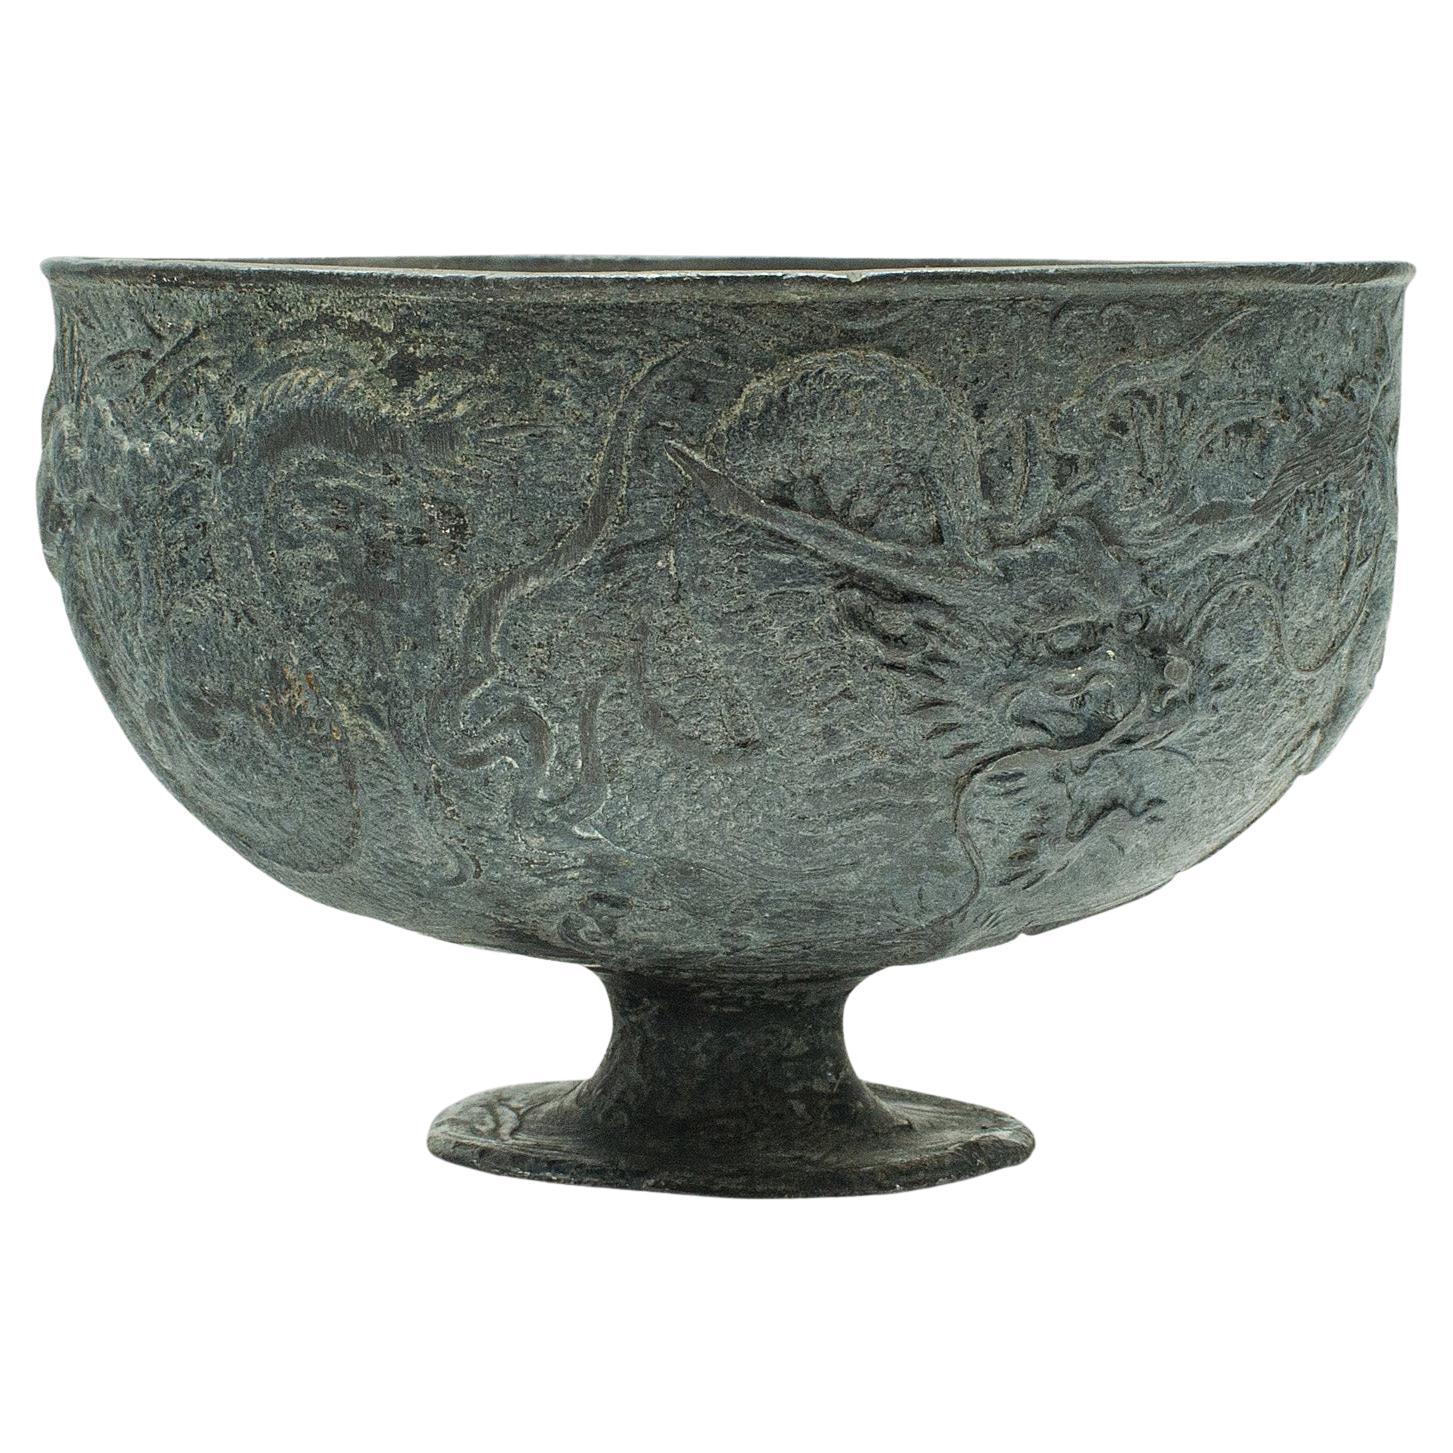 Antique Libation Cup, Chinese, Lead Alloy, Decorative Bowl, Victorian, C.1880 For Sale